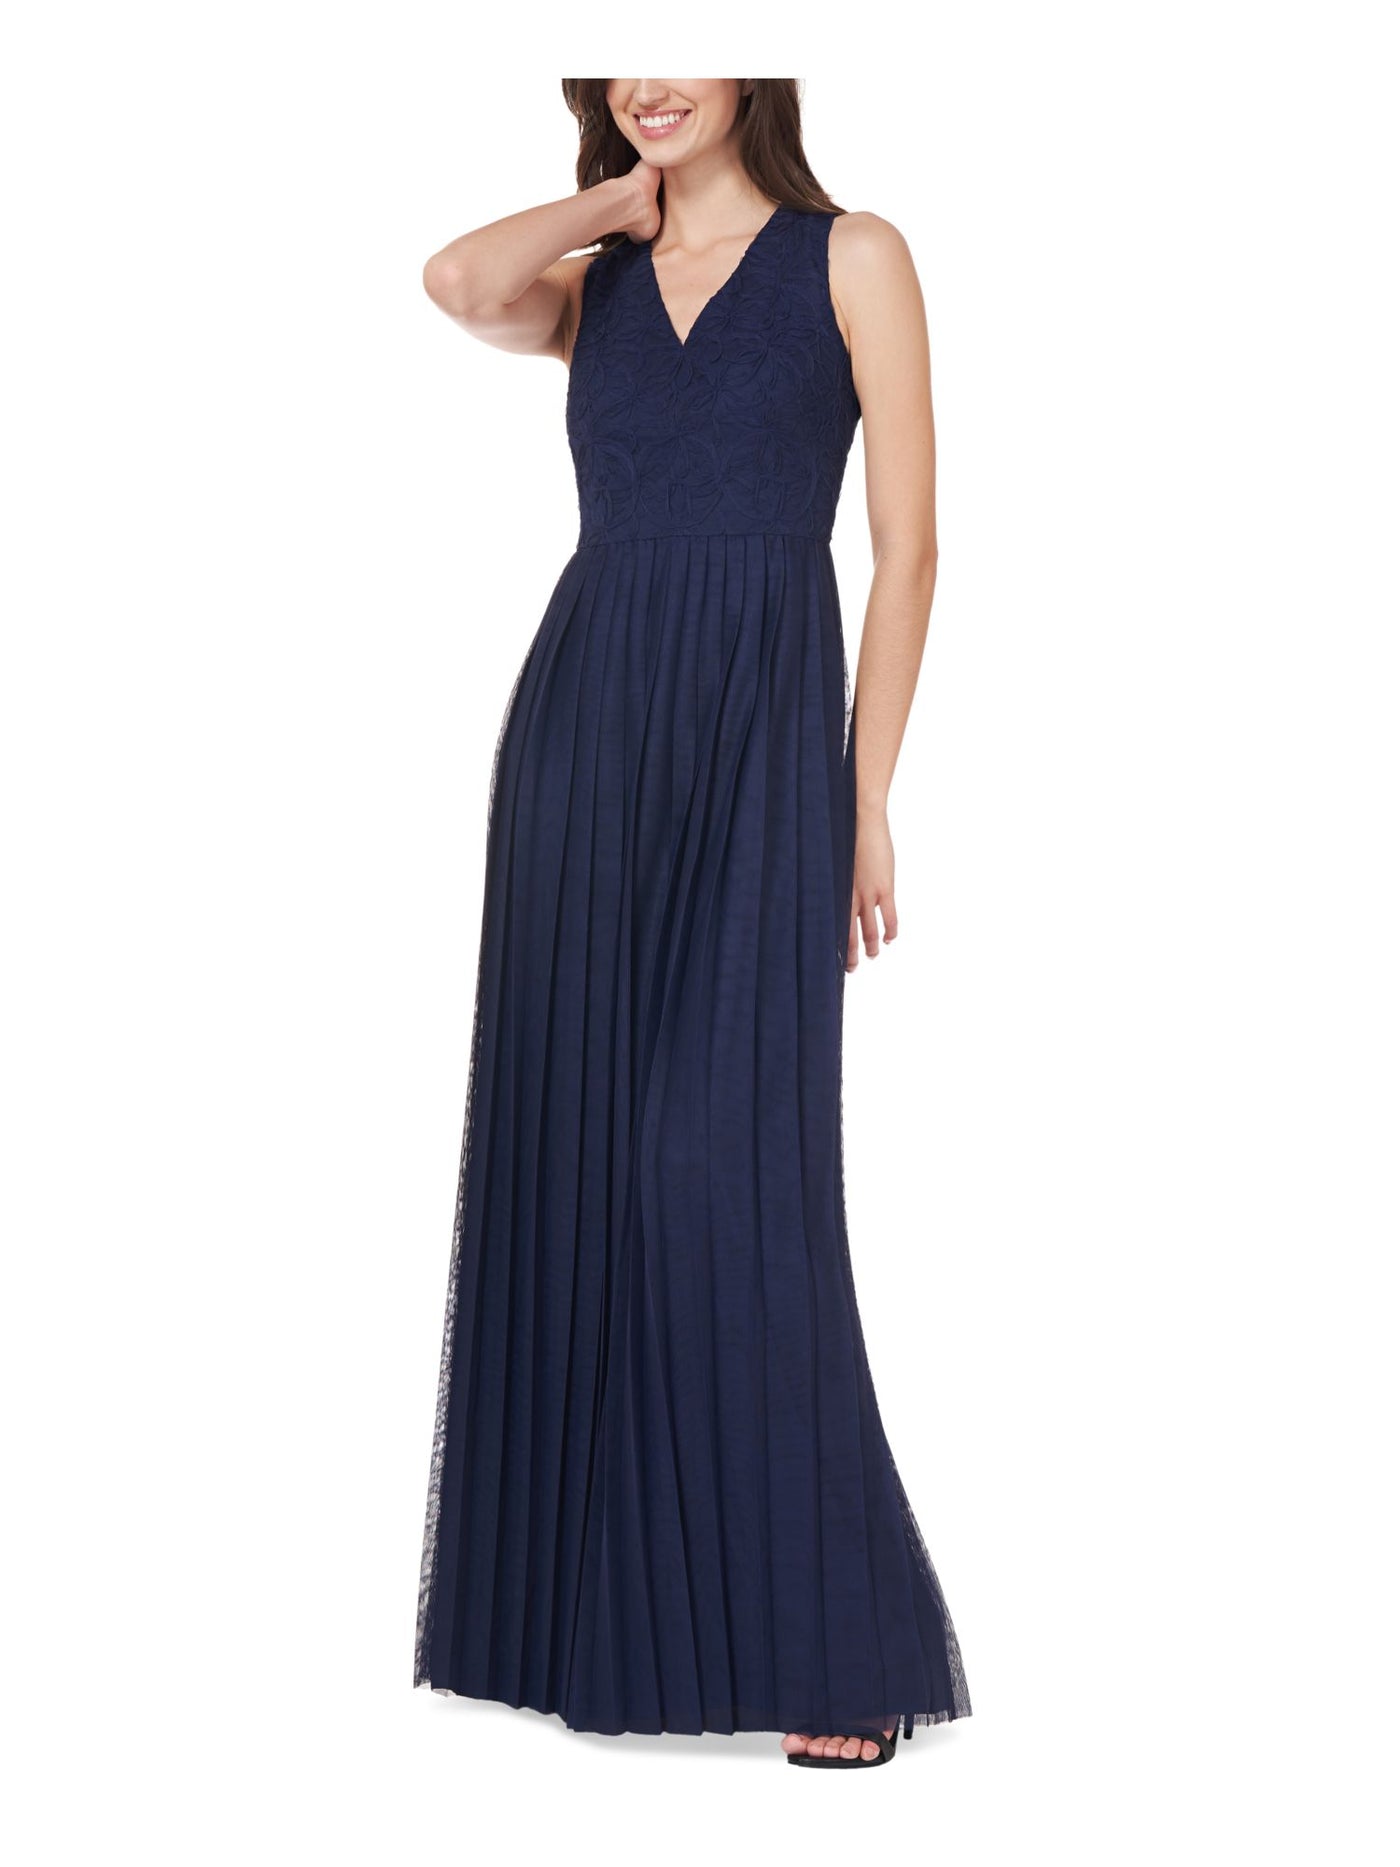 JS COLLECTION Womens Navy Zippered Pleated Sheer Lined Embellished Sleeveless V Neck Full-Length Formal Gown Dress 16